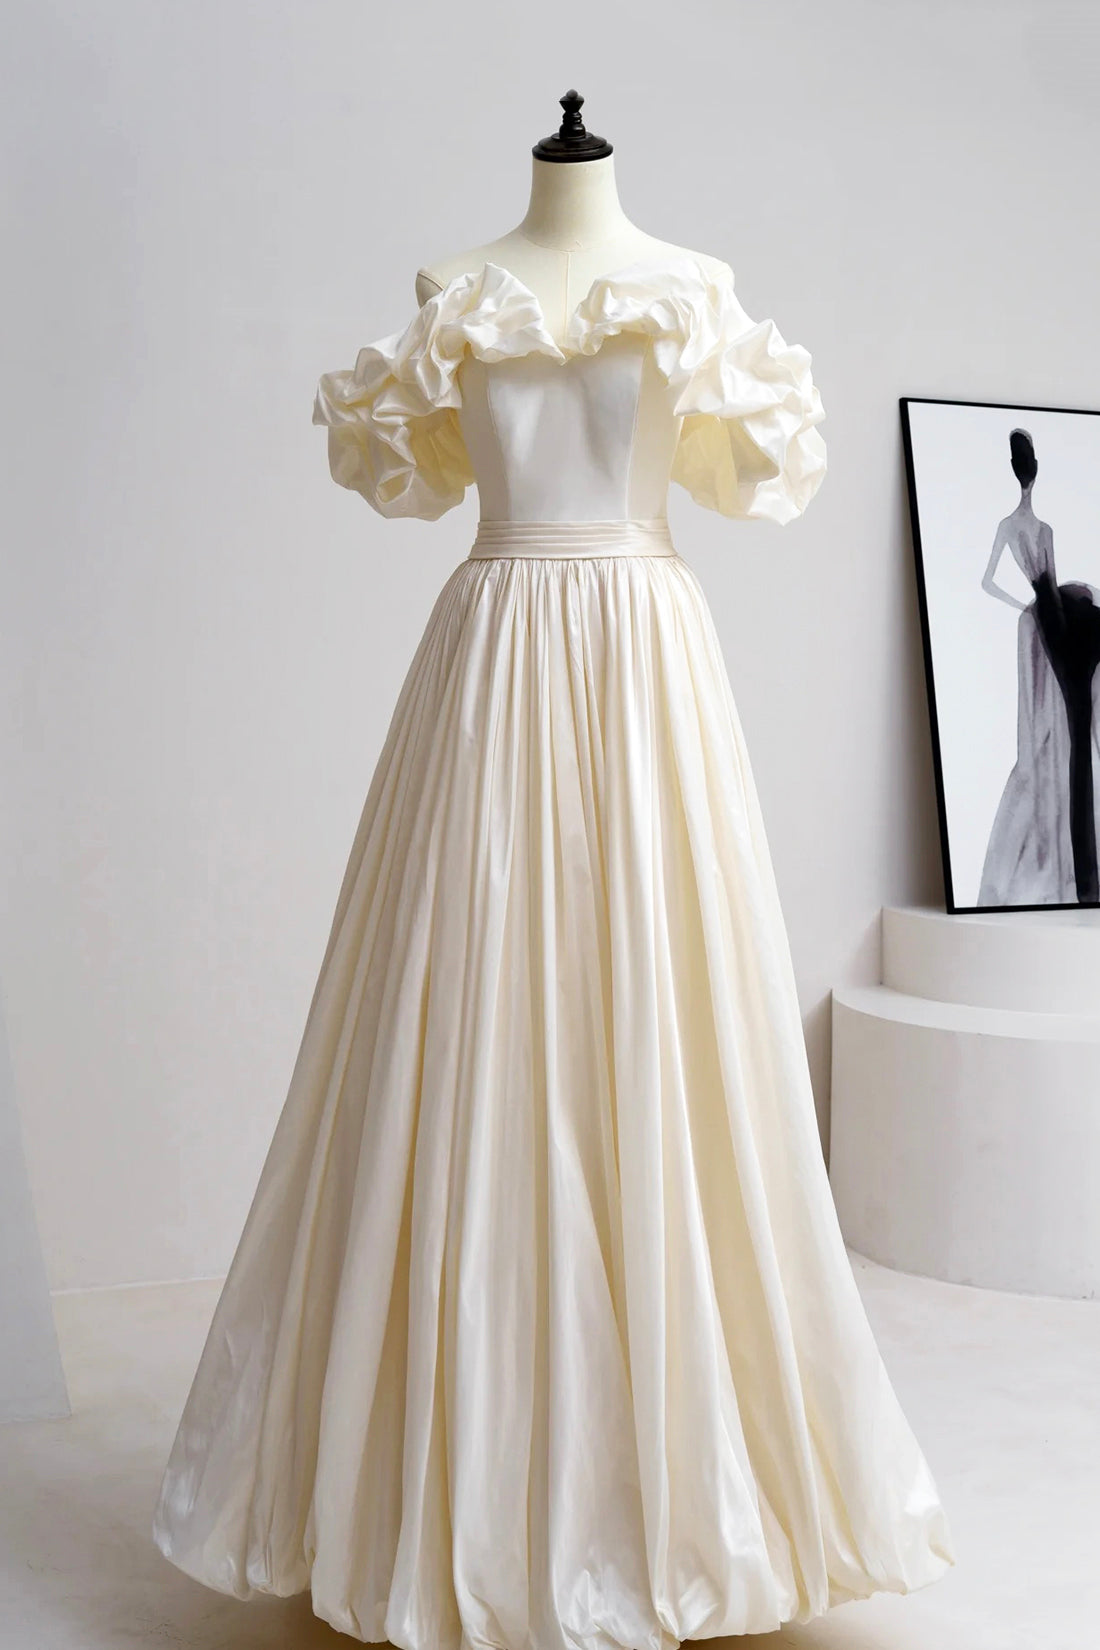 Champagne Satin Floor Length Prom Dress, Off the Shoulder A-Line Evening Party Dress